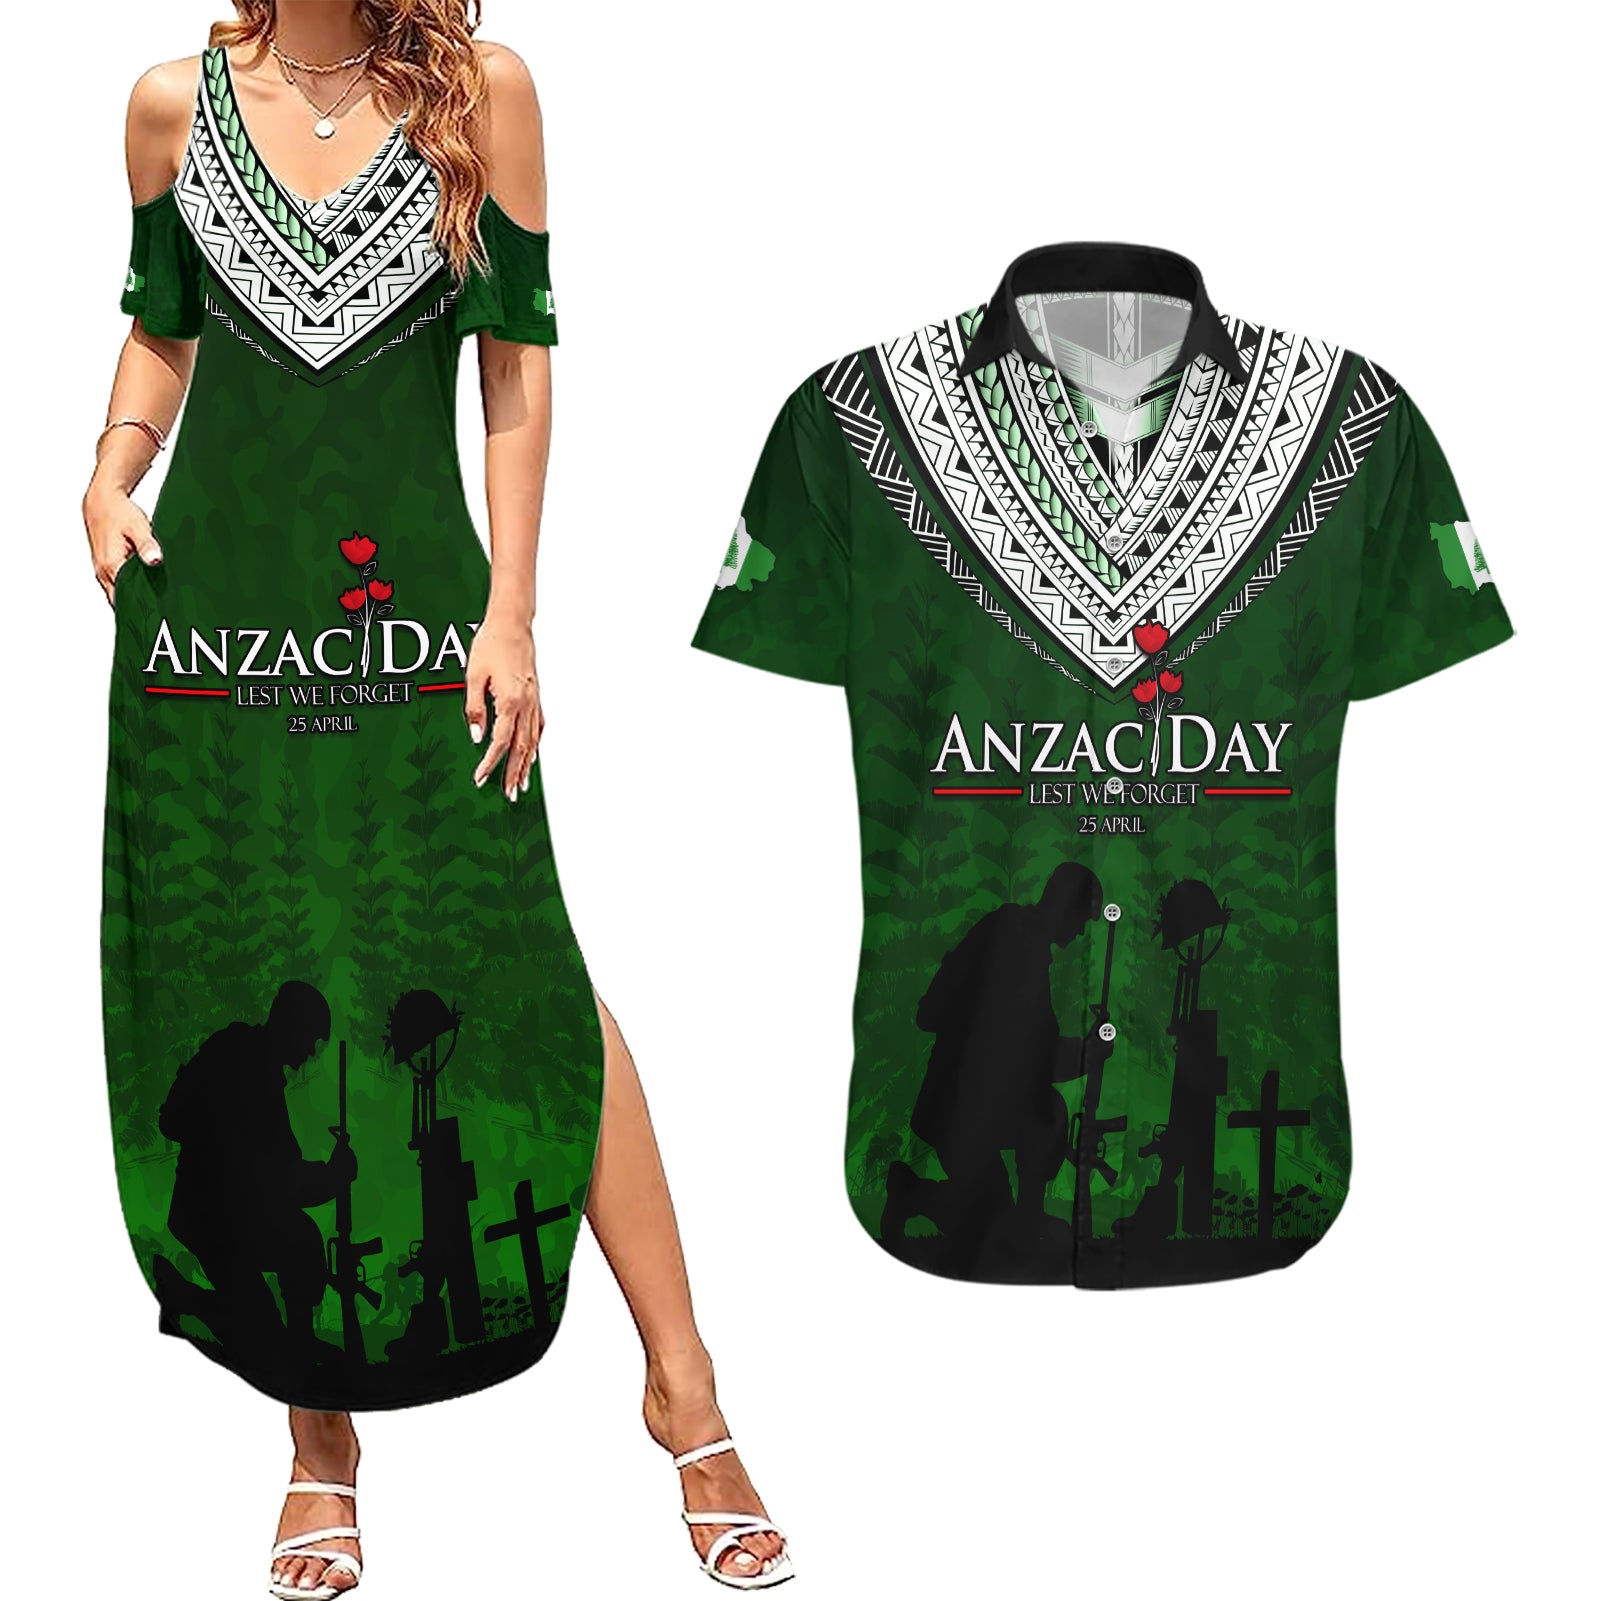 Norfolk Island ANZAC Day Couples Matching Summer Maxi Dress and Hawaiian Shirt Soldier Lest We Forget Camouflage LT03 Green - Polynesian Pride